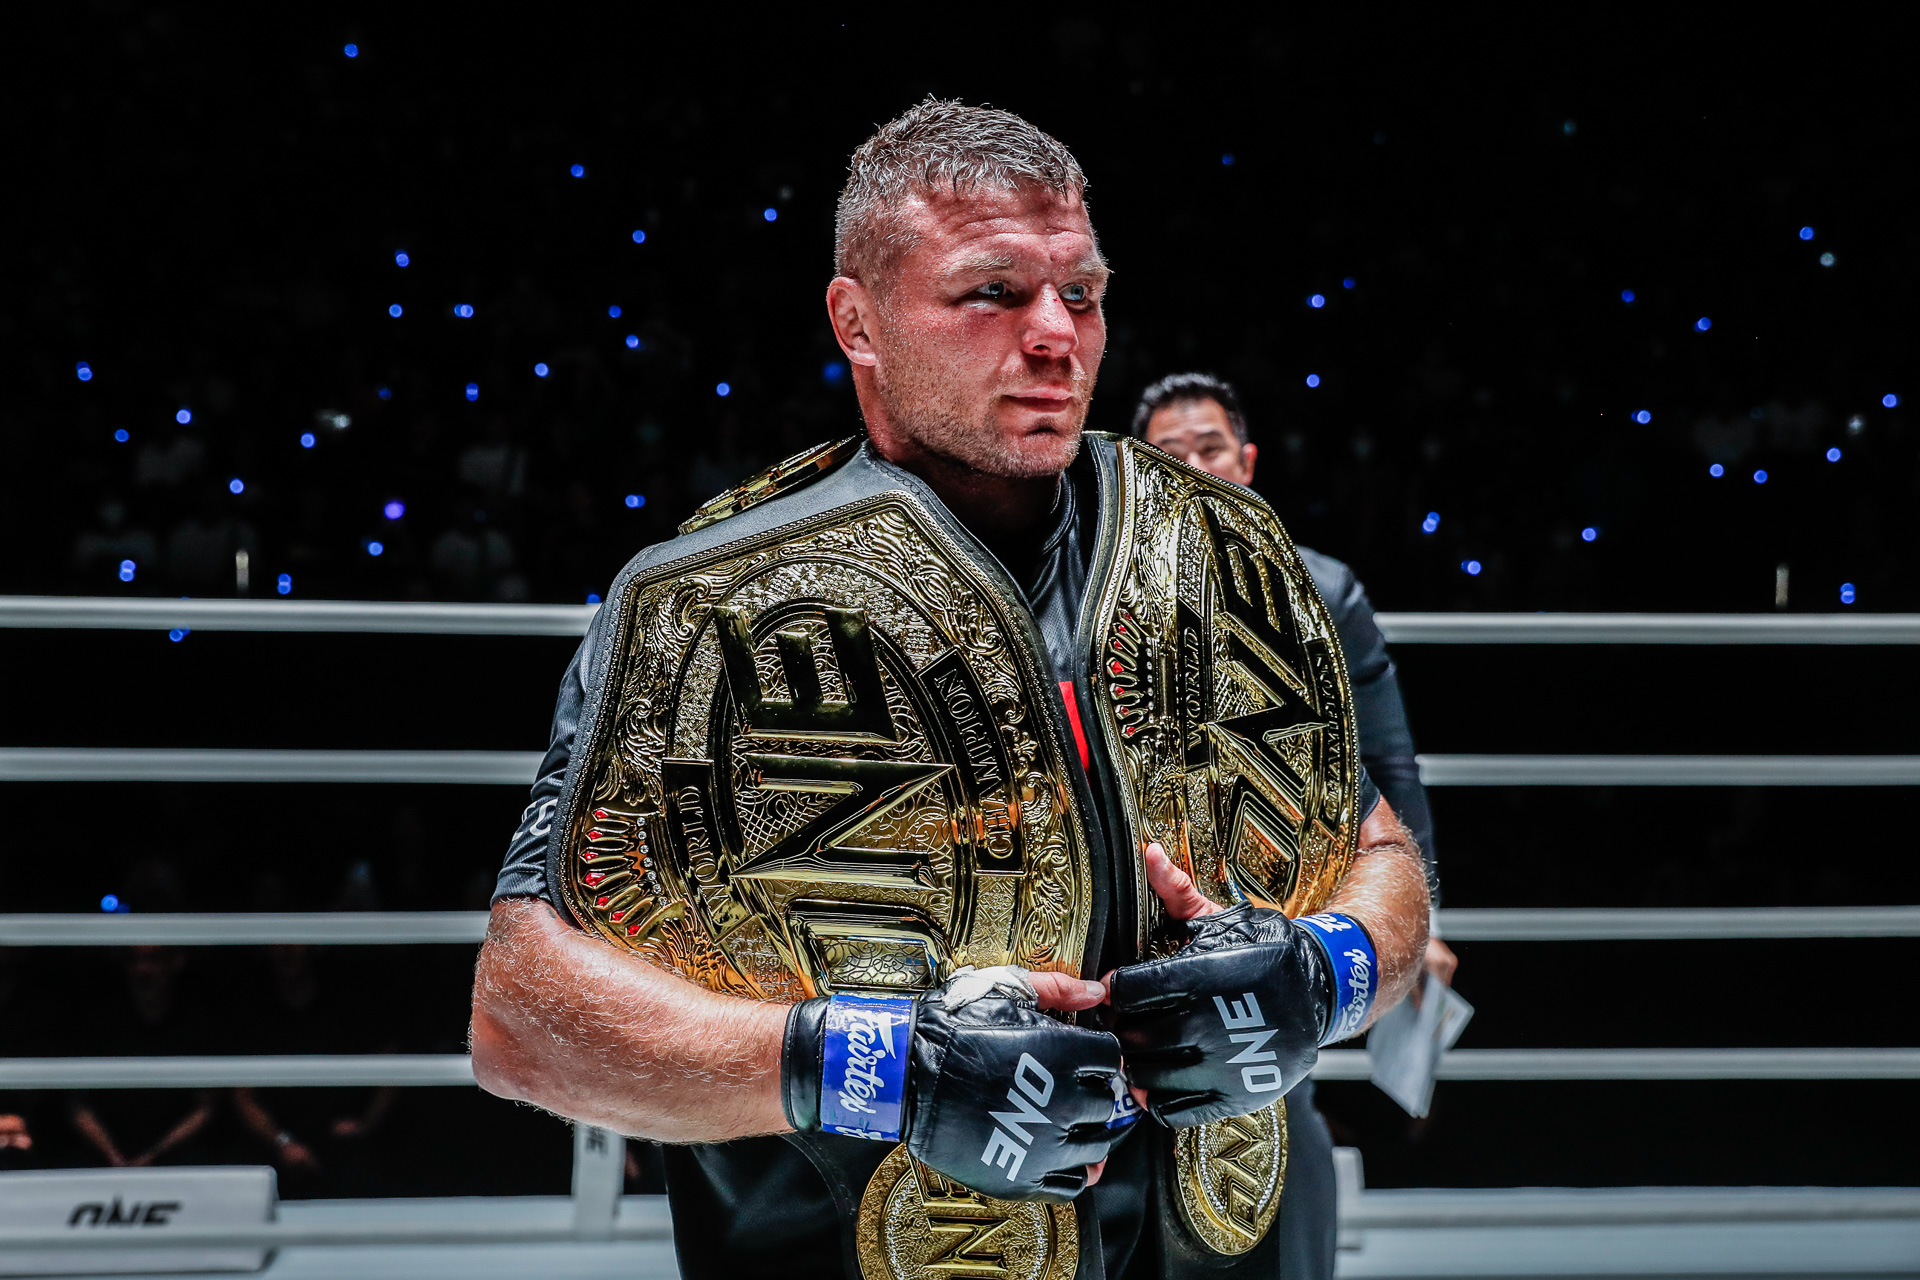 Anatoly Malykhin is 'making room for the real fight'!